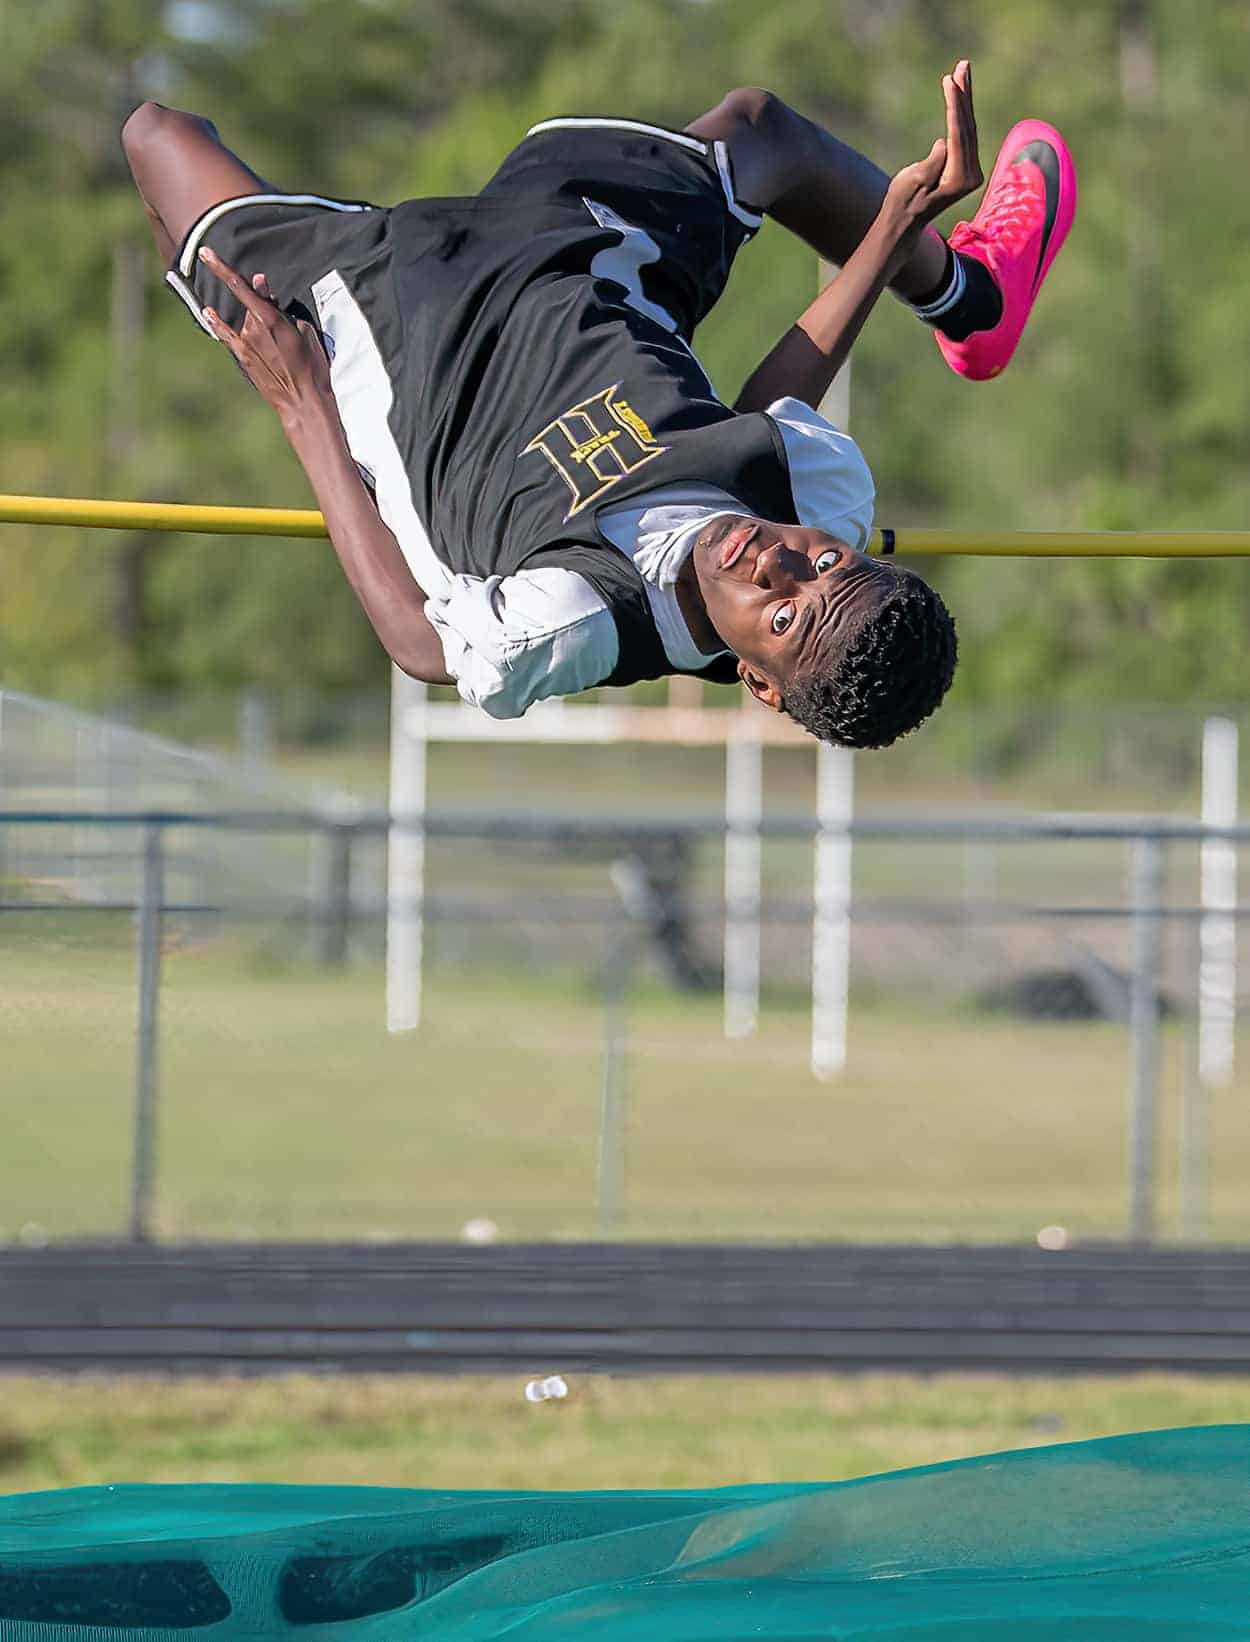 Hernando High’s Dakendrick Miller concentrates on his landing spot after a successful high jump attempt at the GC8 Track and Field Championships at Weeki Wachee High School. Photo by [Joe DiCristofalo]